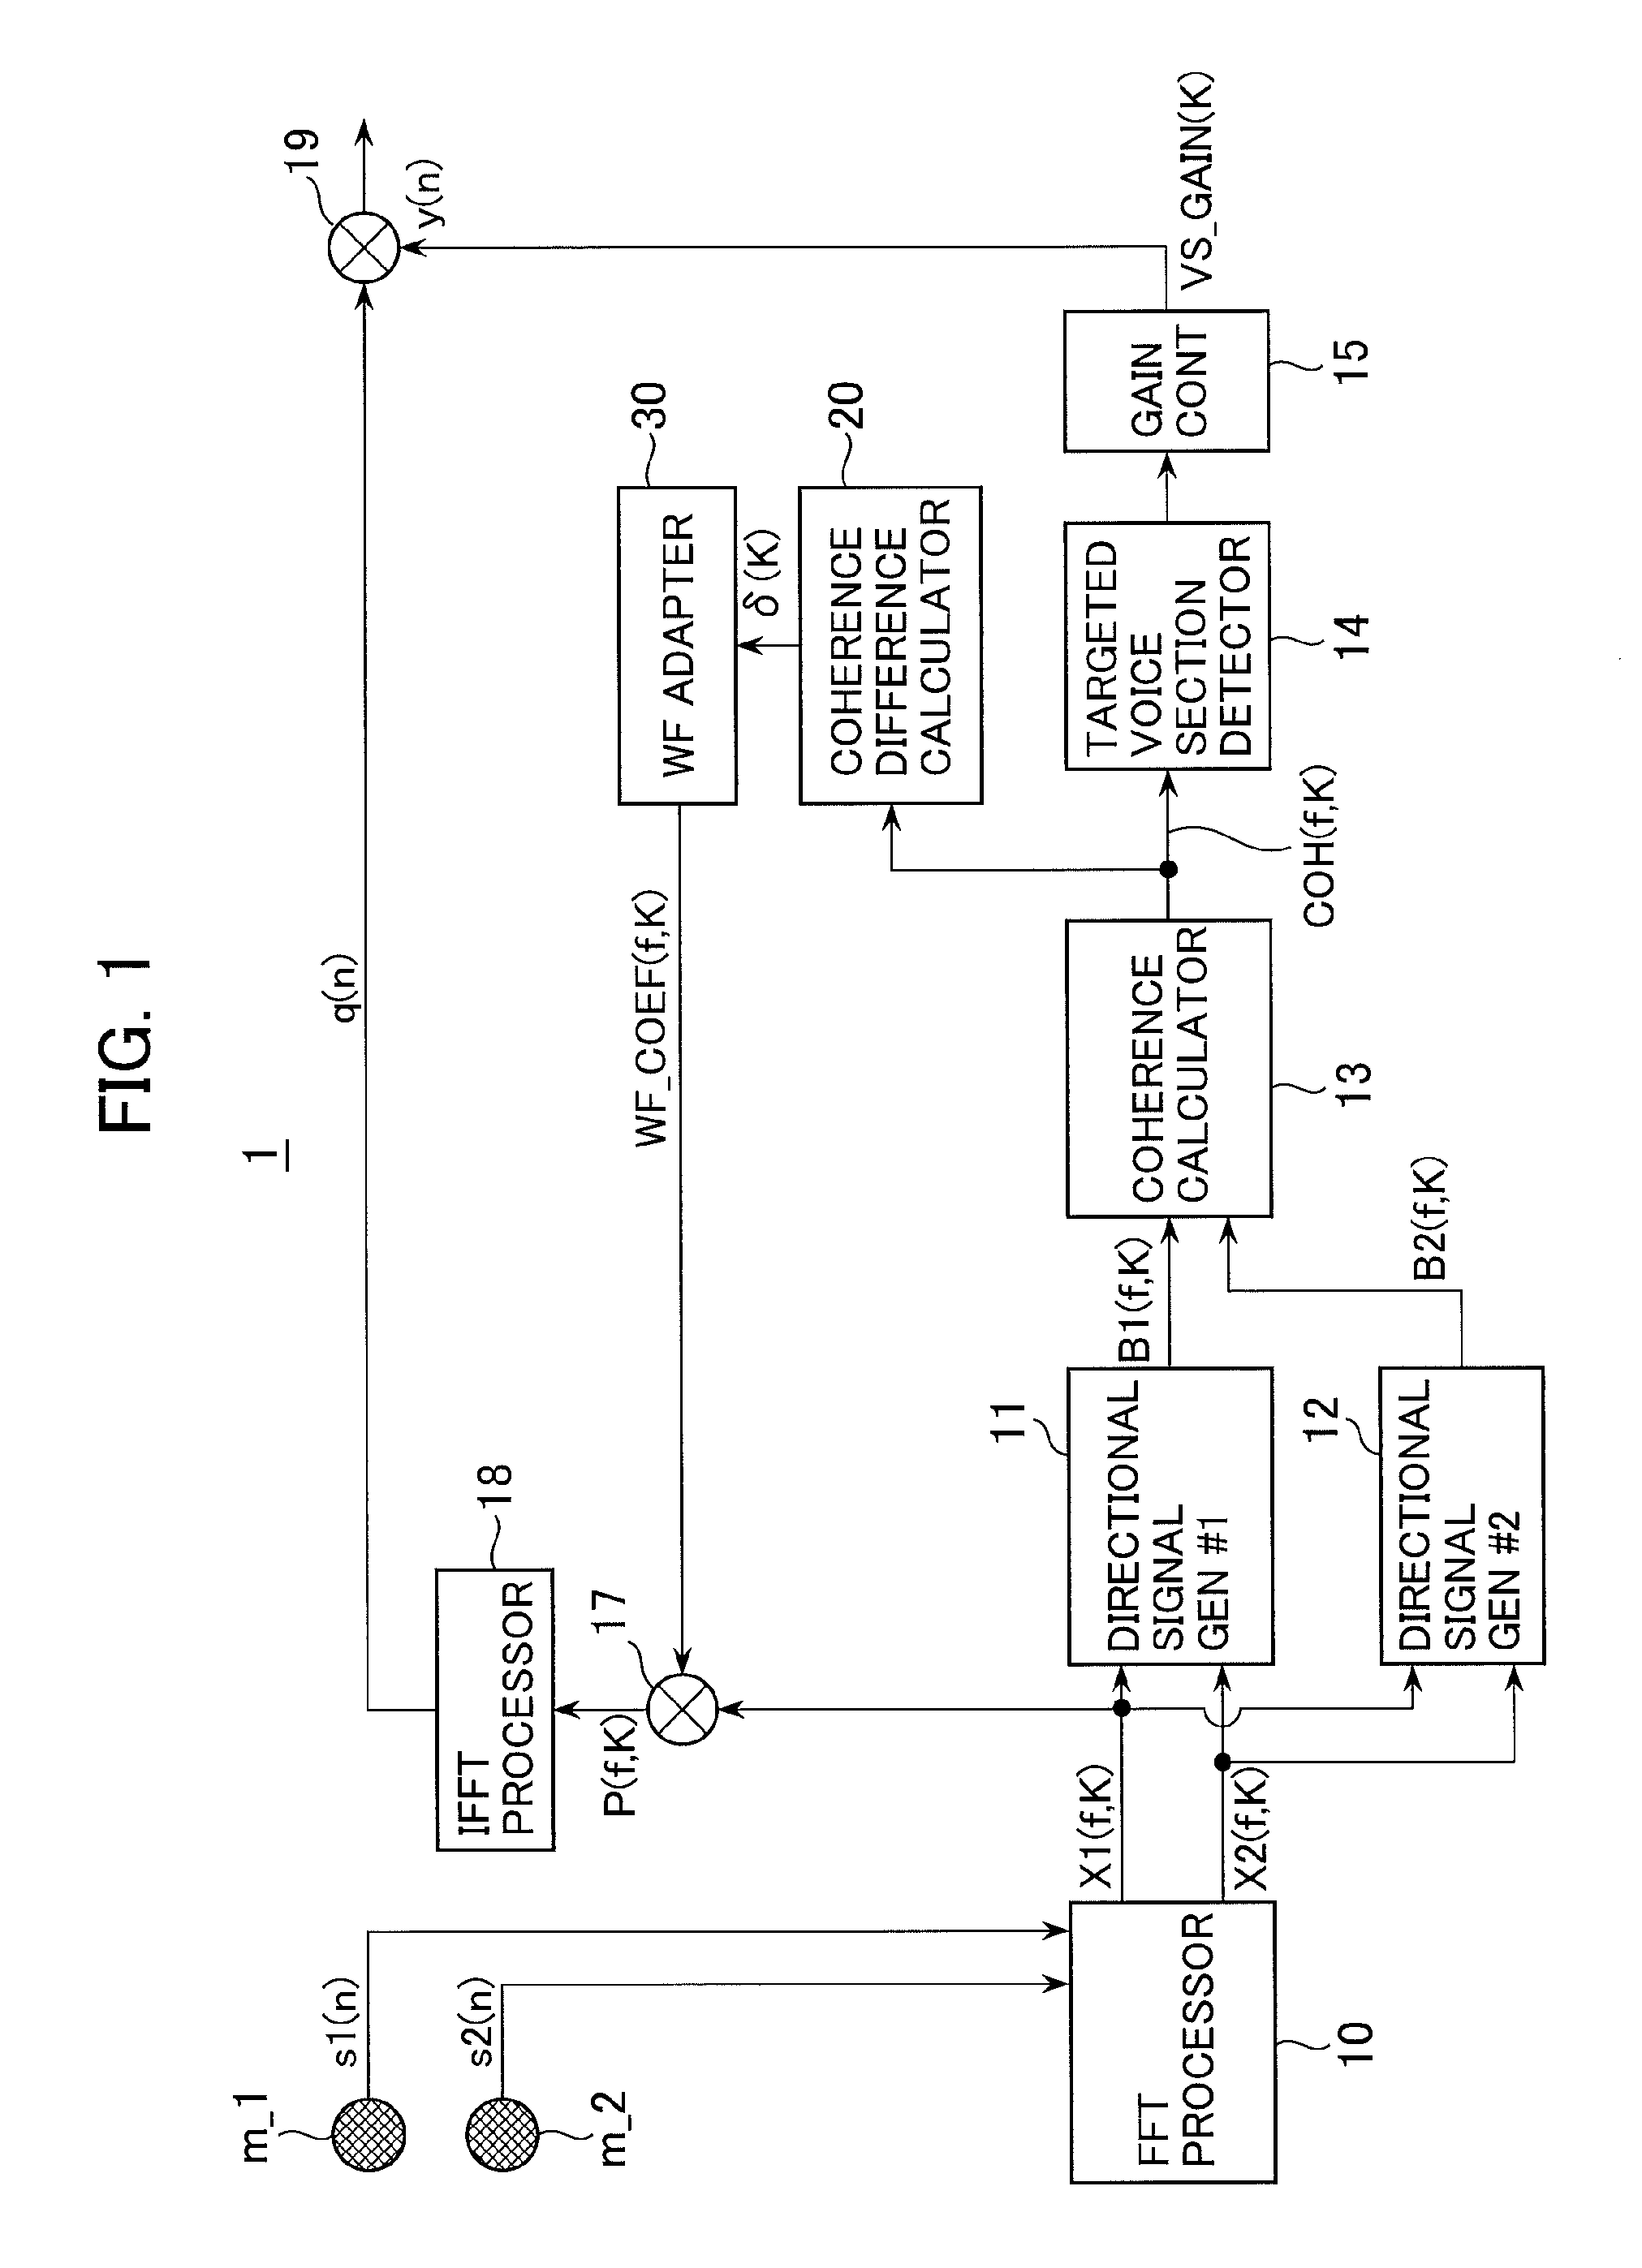 Apparatus and method for suppressing noise from voice signal by adaptively updating Wiener filter coefficient by means of coherence